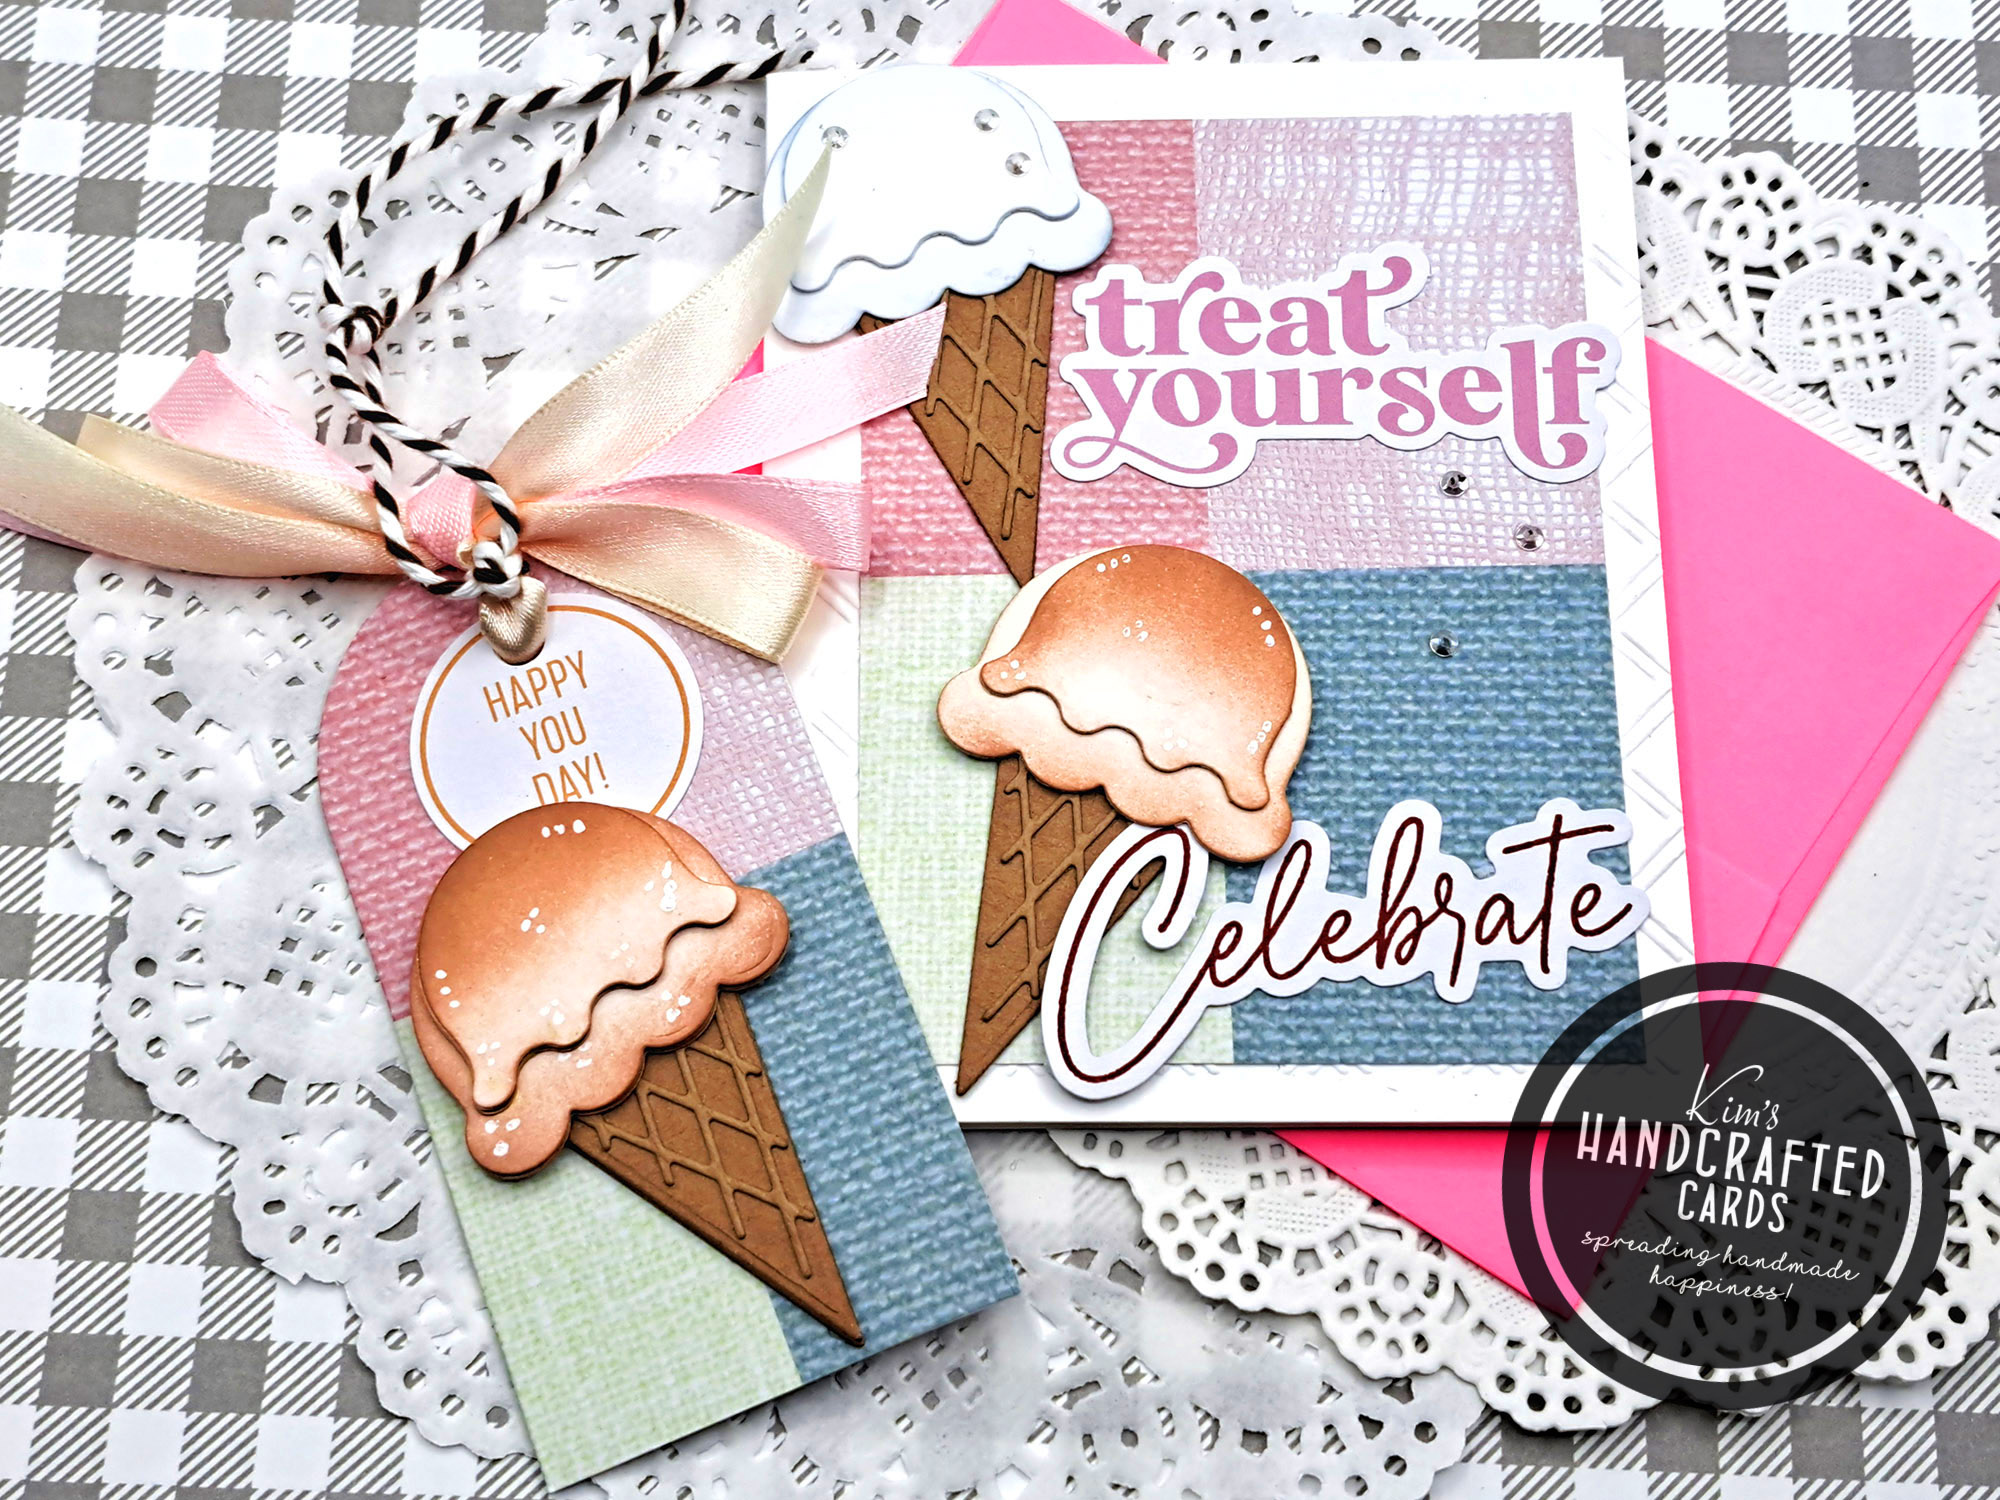 Scrapbook.com "Sweet Scoops" Card & Matching Gift Tag